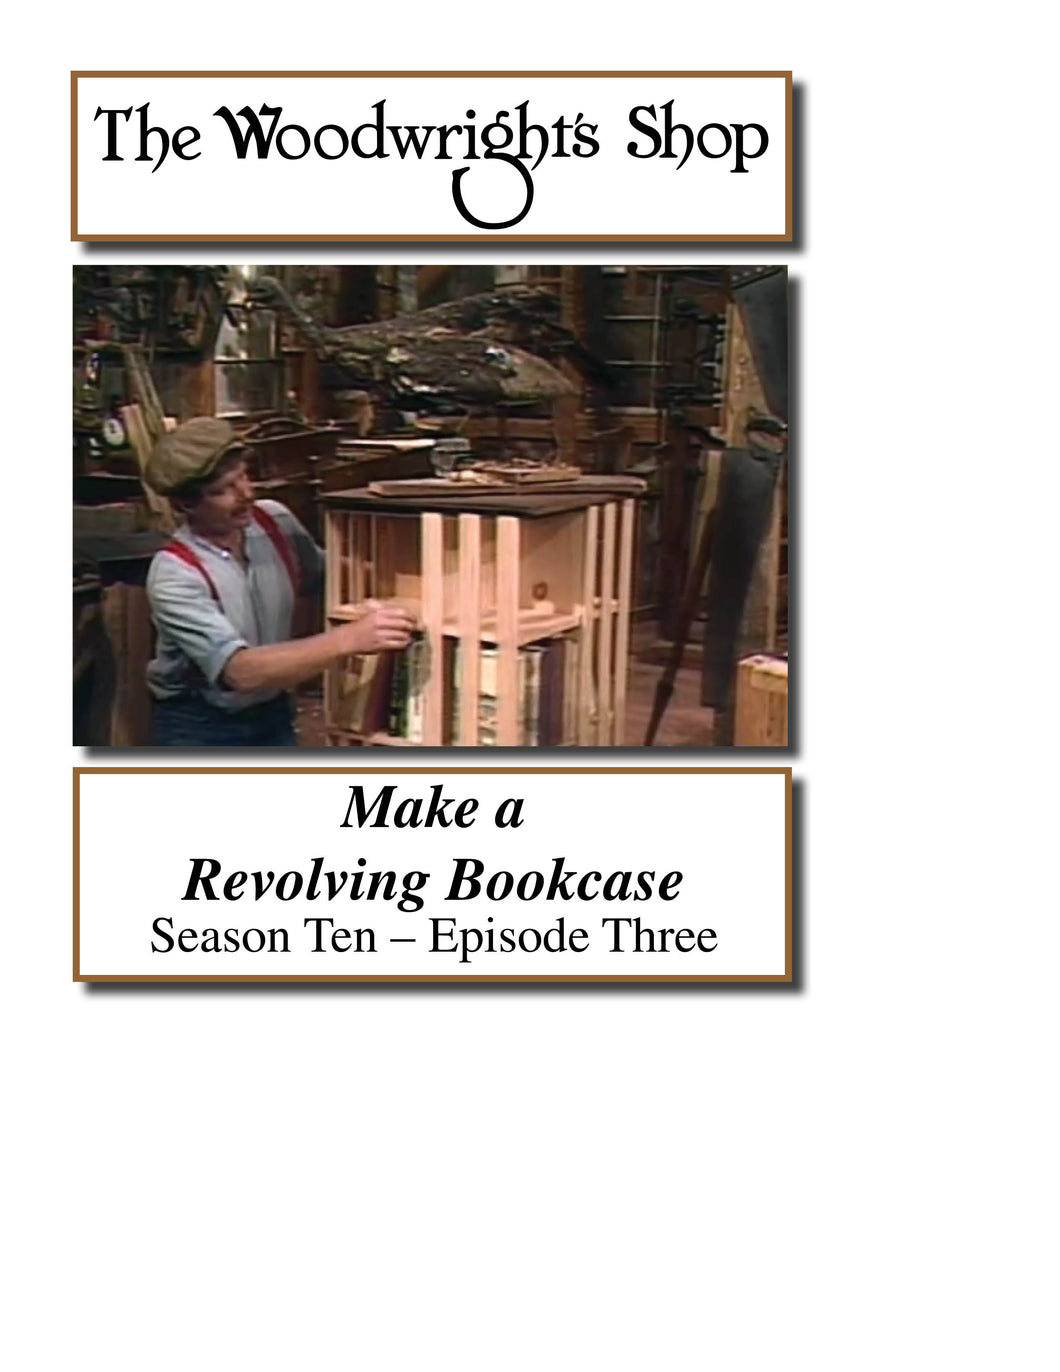 The Woodwright's Shop, Season 10, Episode 3 - Make a Revolving Bookcase Video Download